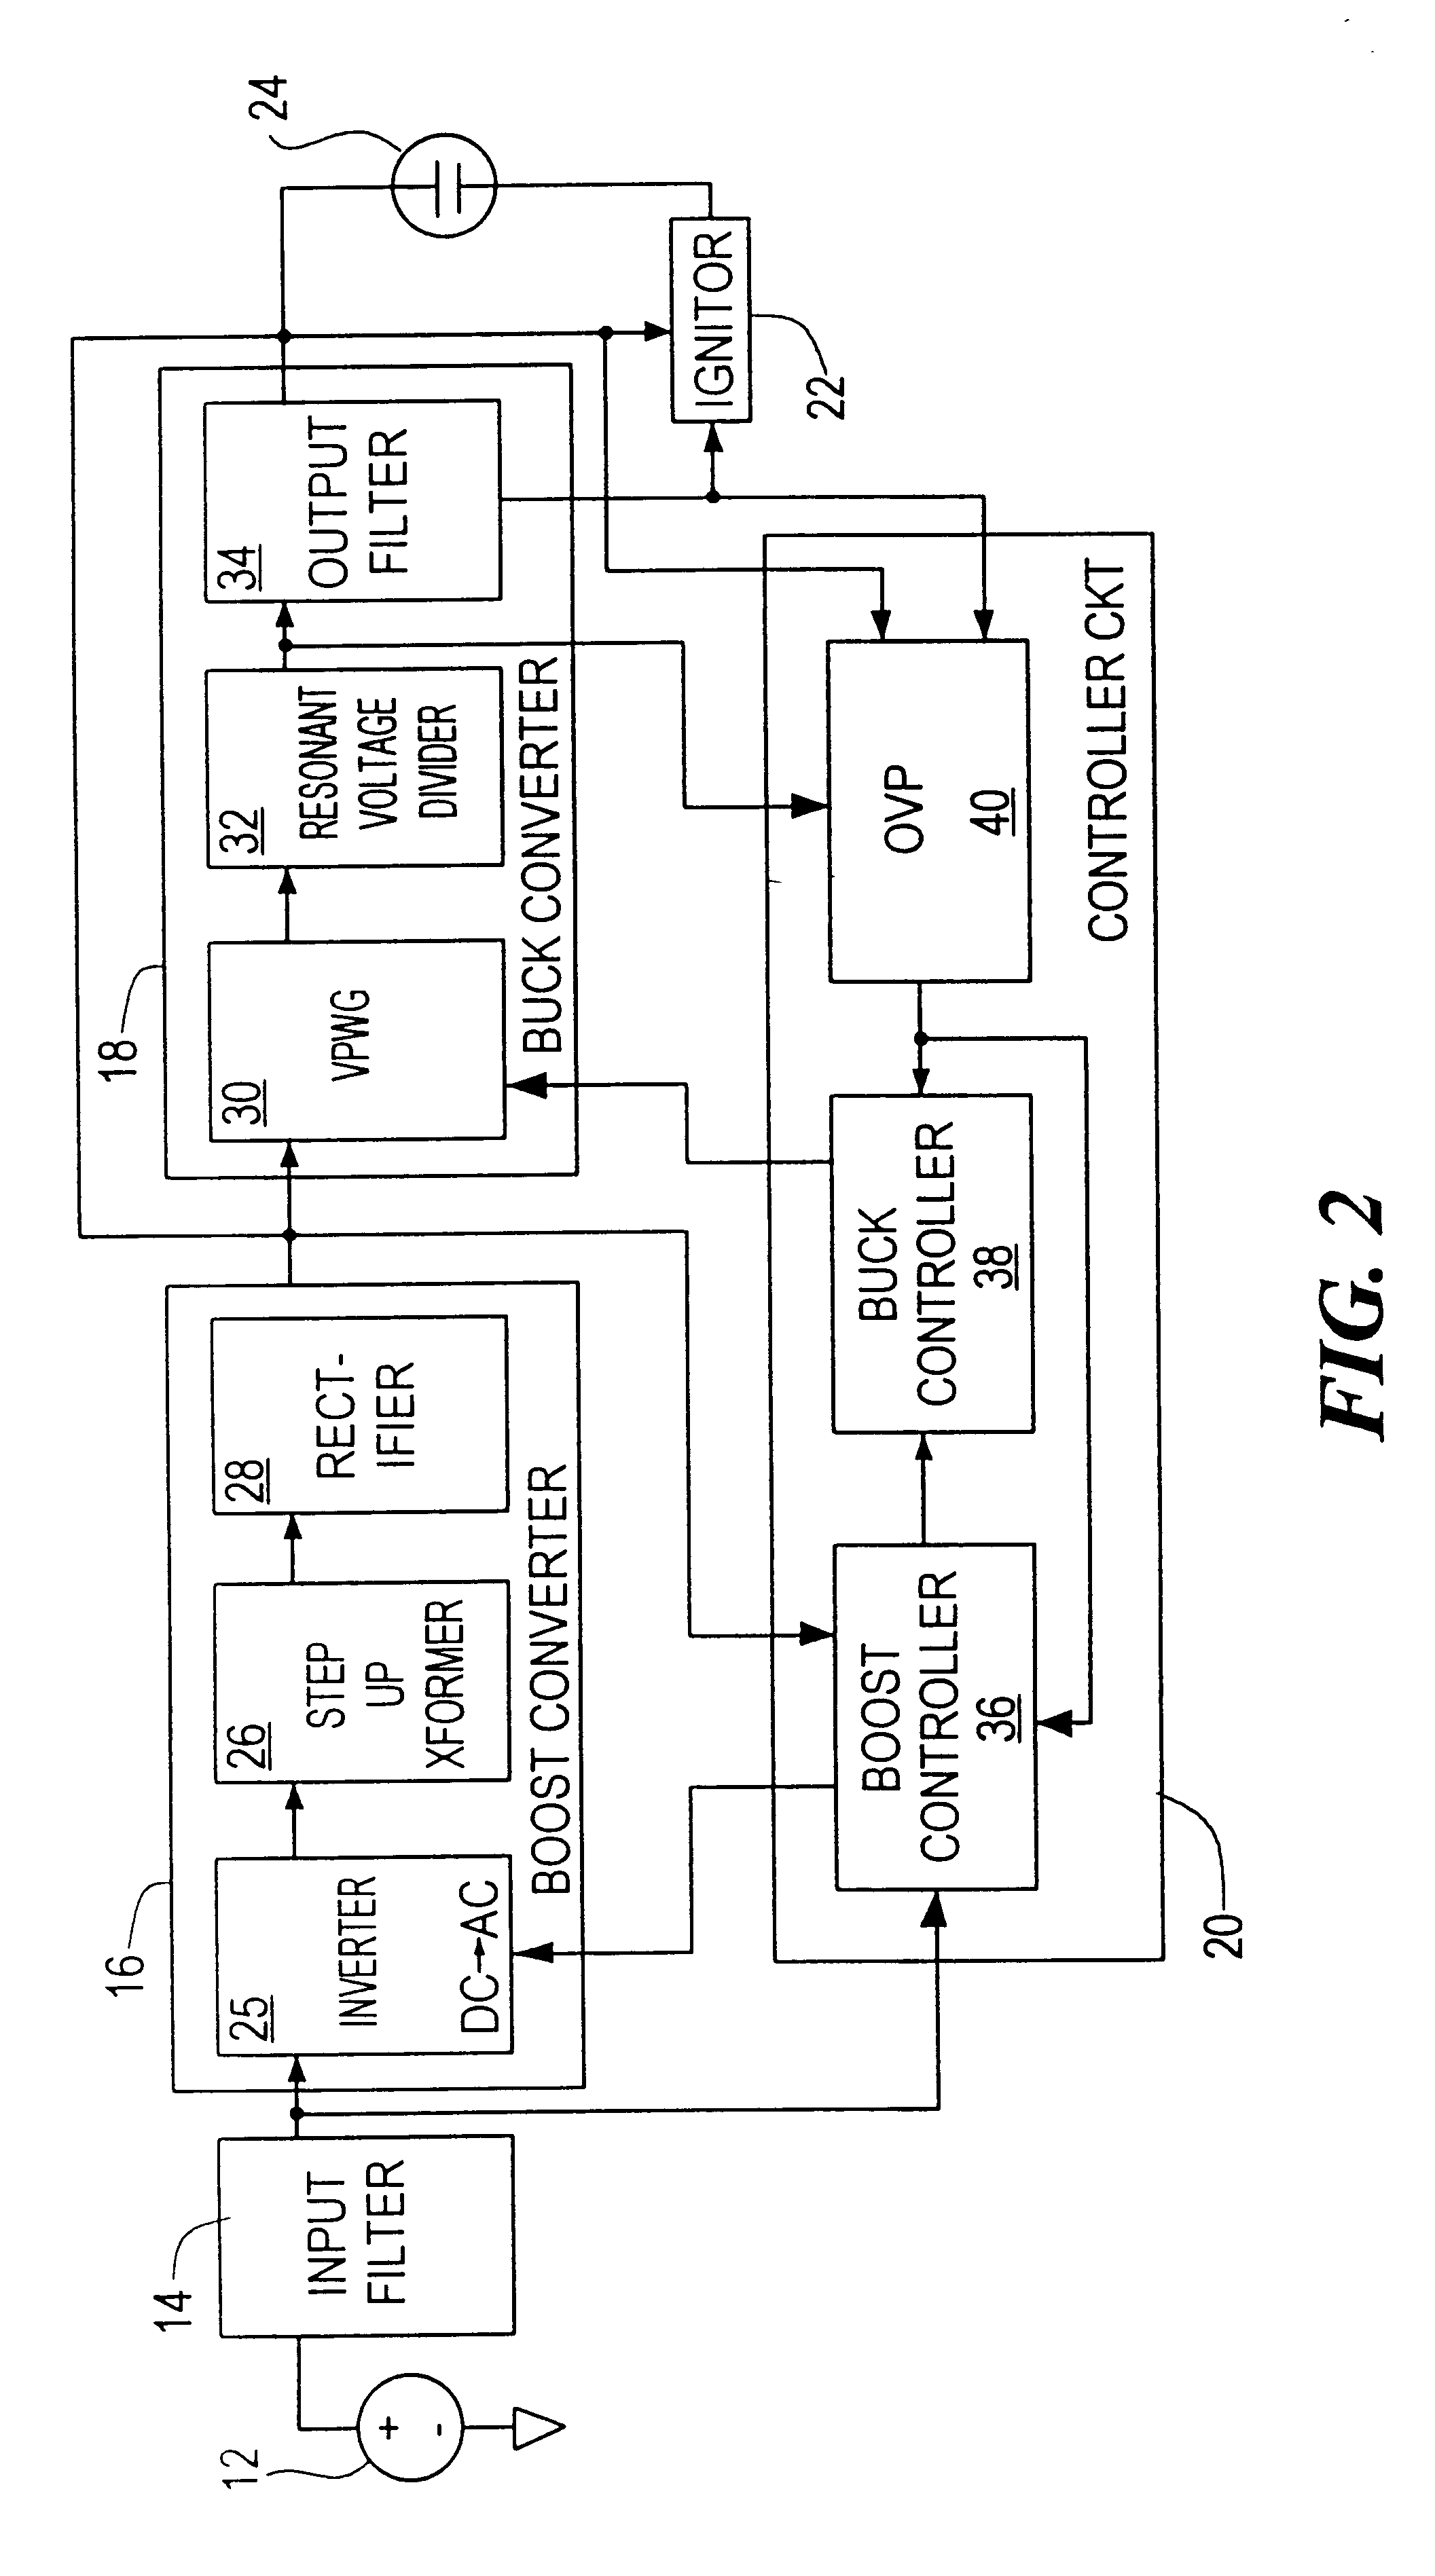 Ballast circuit for high intensity discharge lamps